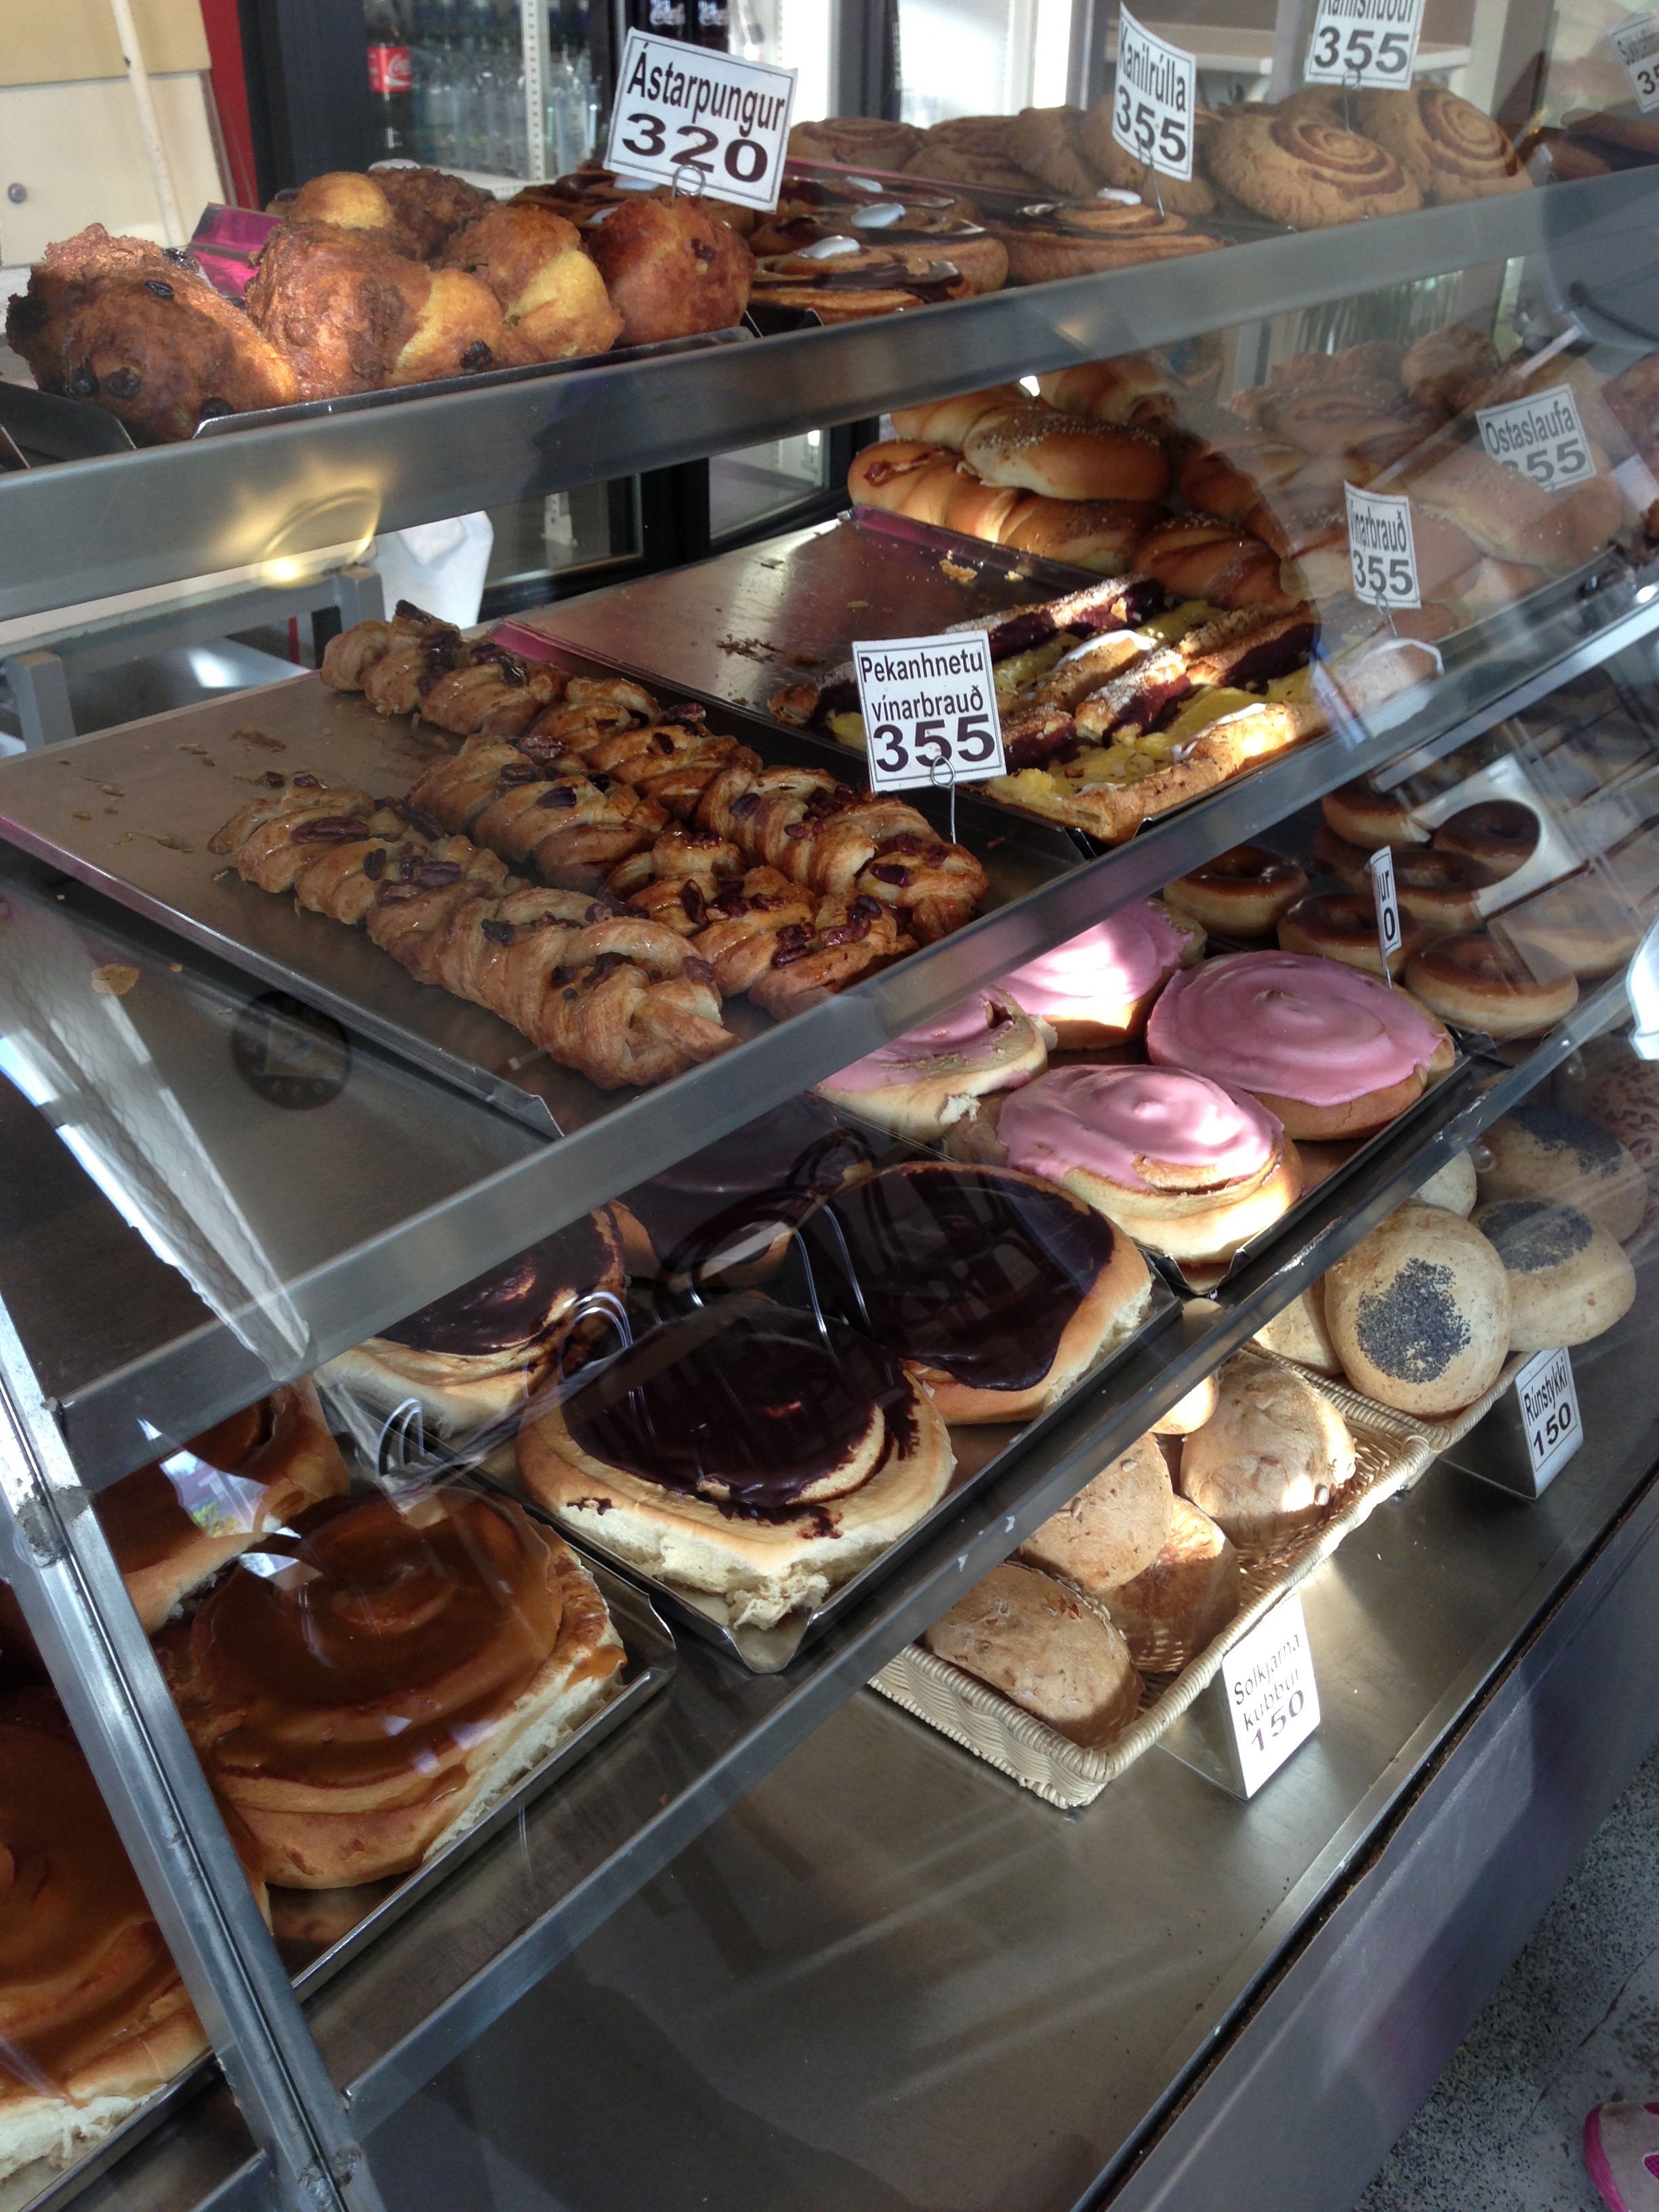 Selection of pastries.